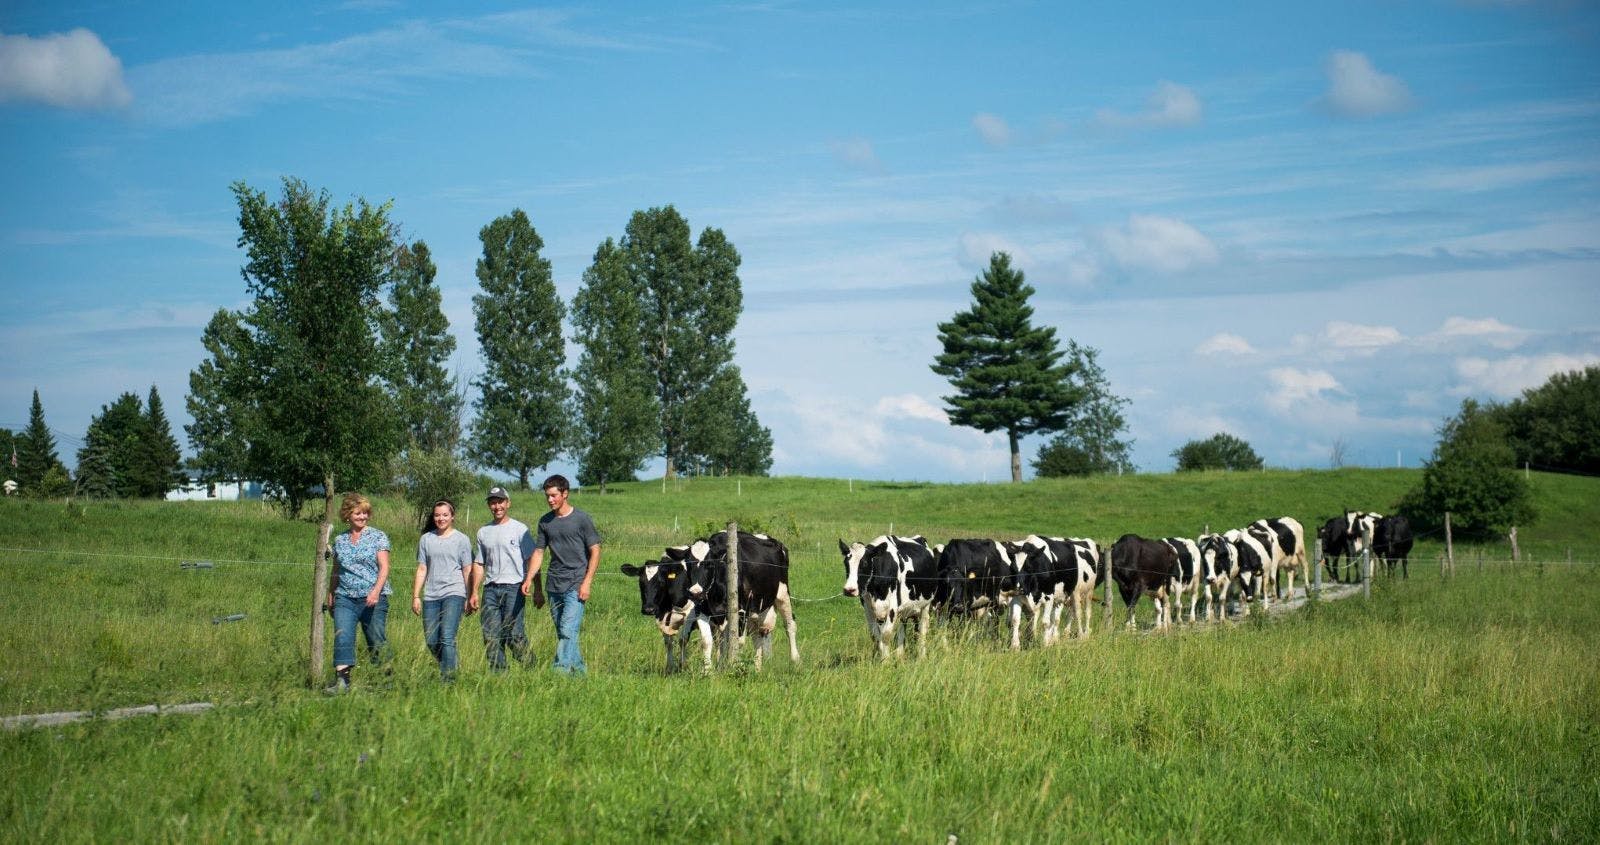 Organic Valley farmers, the Choiniere family, walk with their cows.